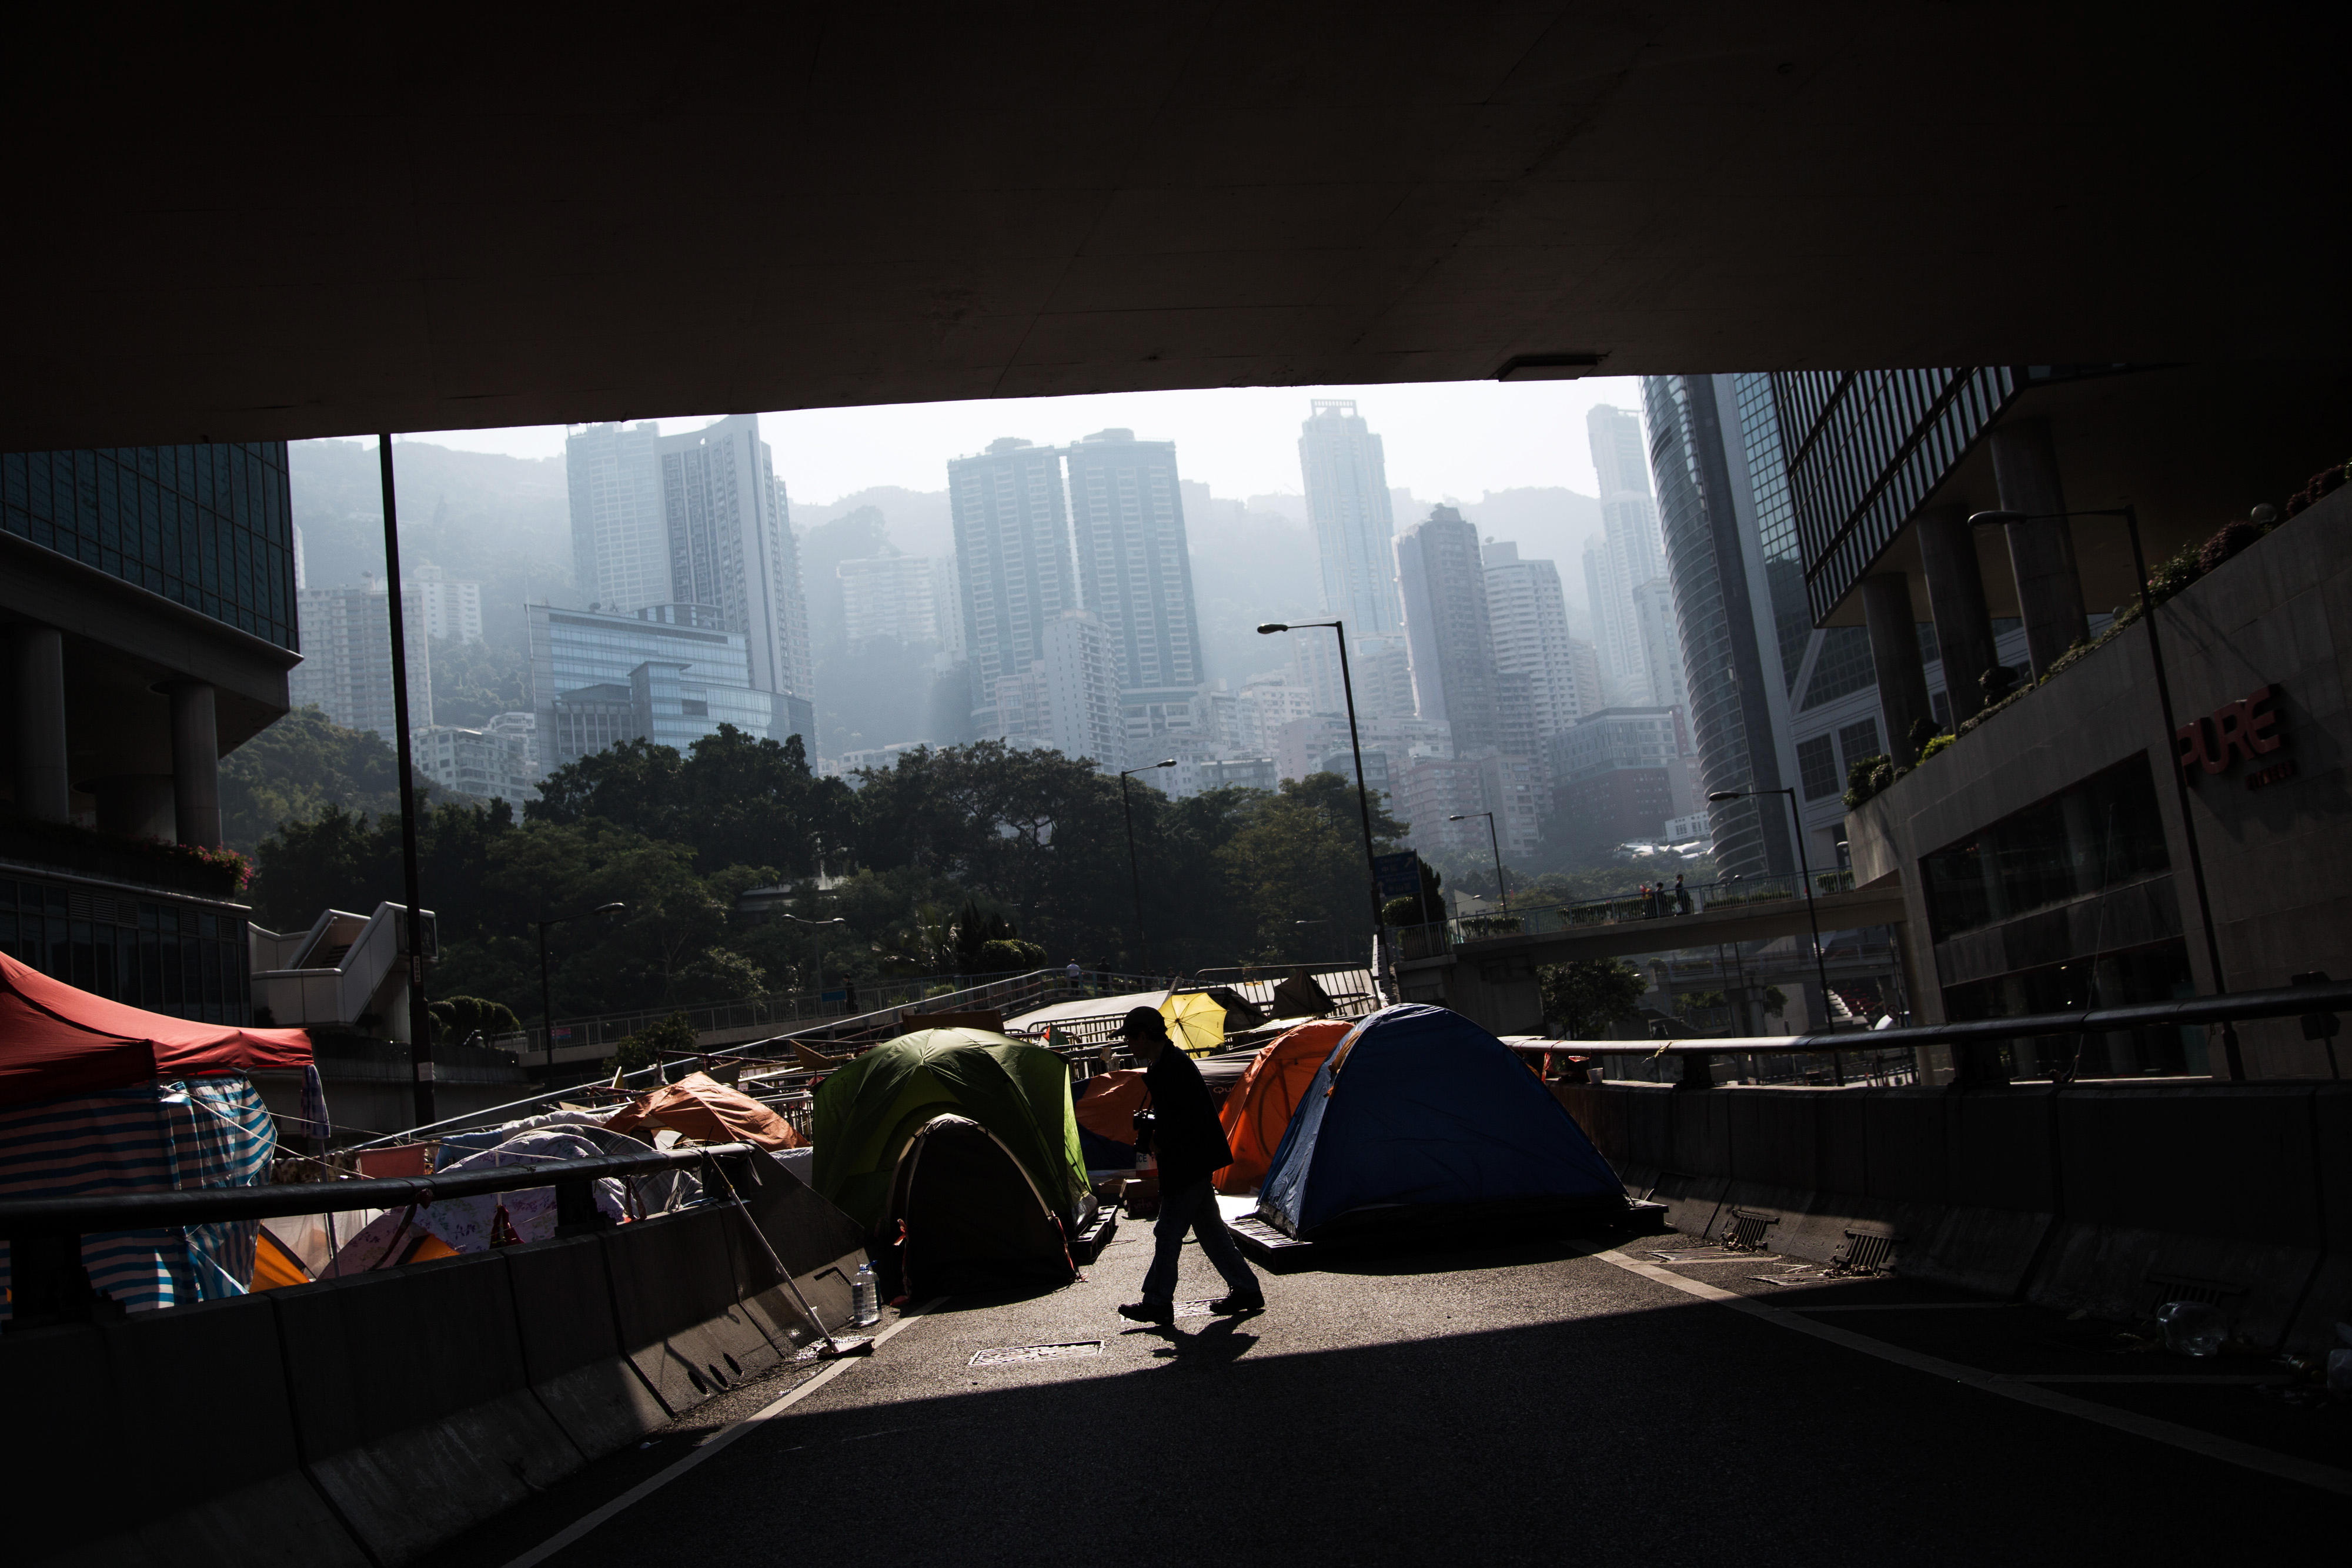 Demonstrators Continue to Occupy Streets In Hong Kong